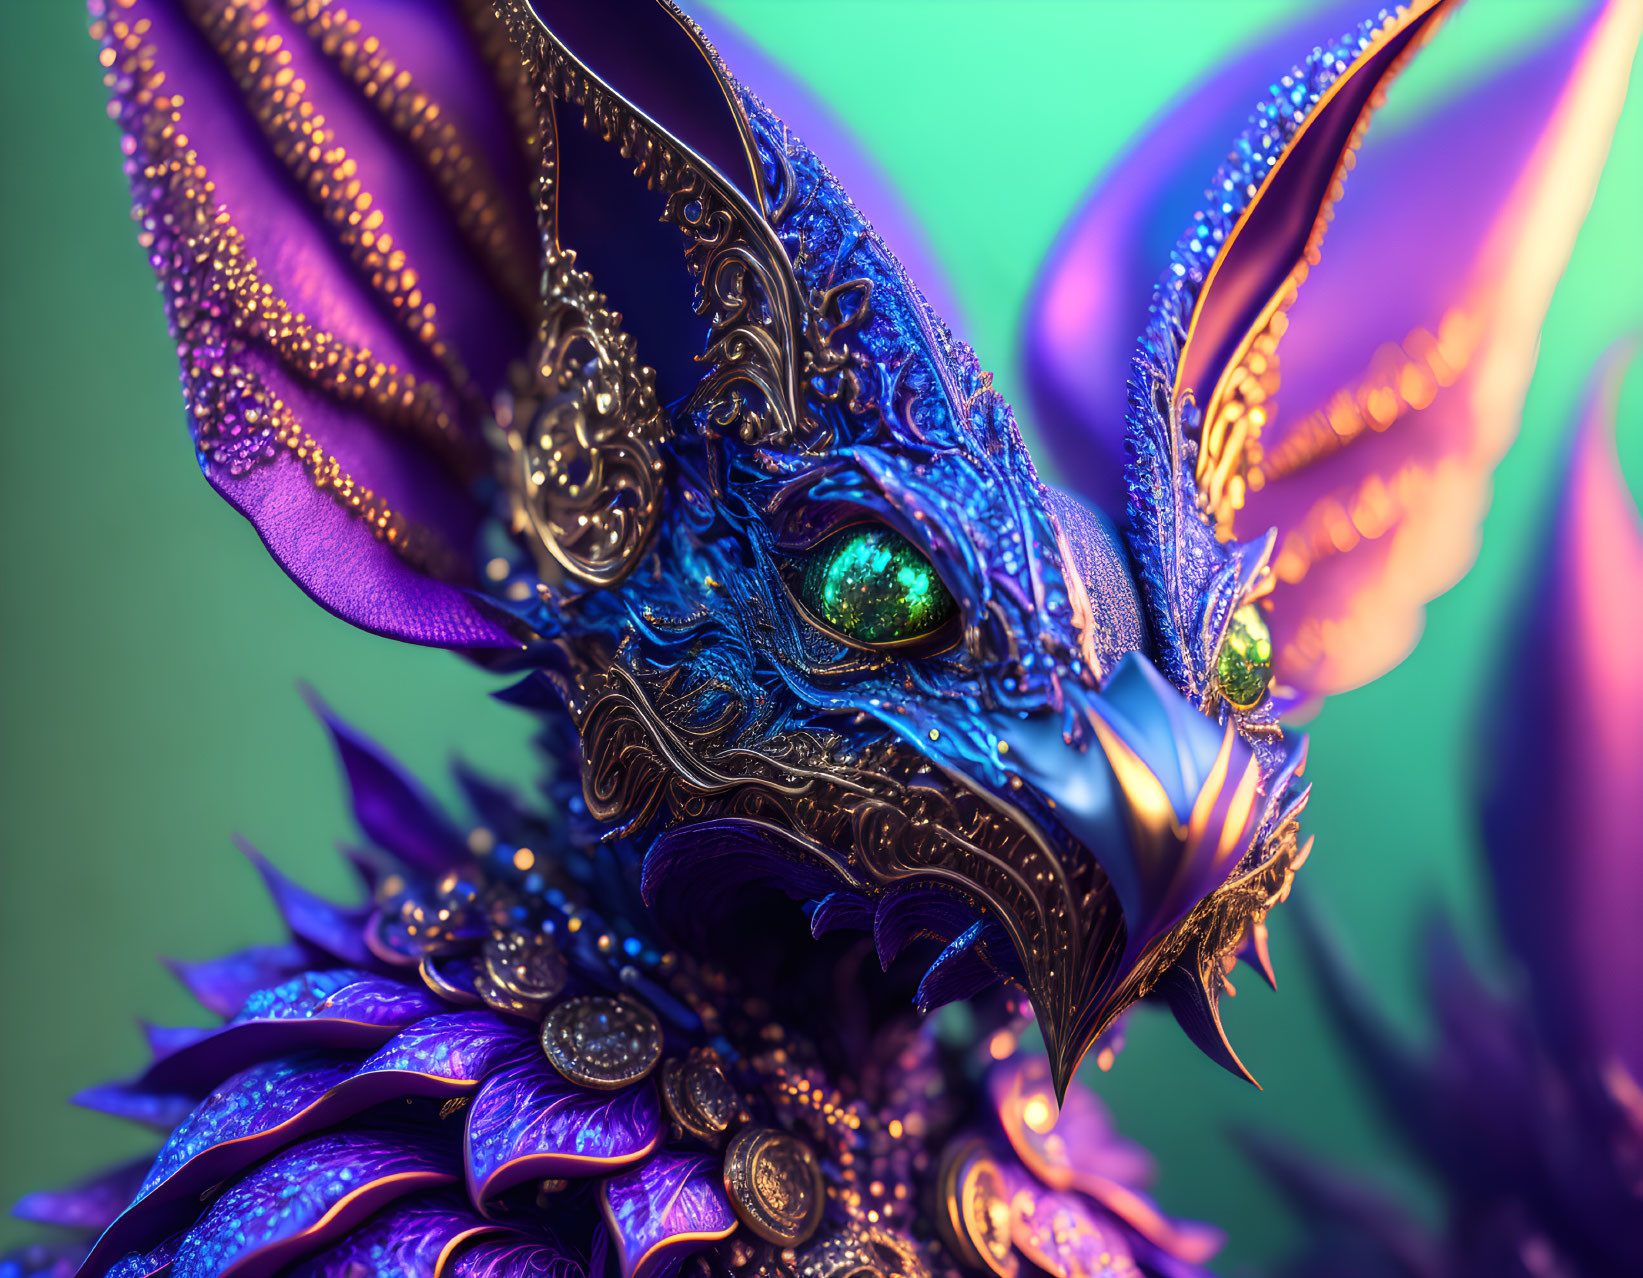 Detailed Metallic Dragon Sculpture with Vibrant Purple and Blue Patterns